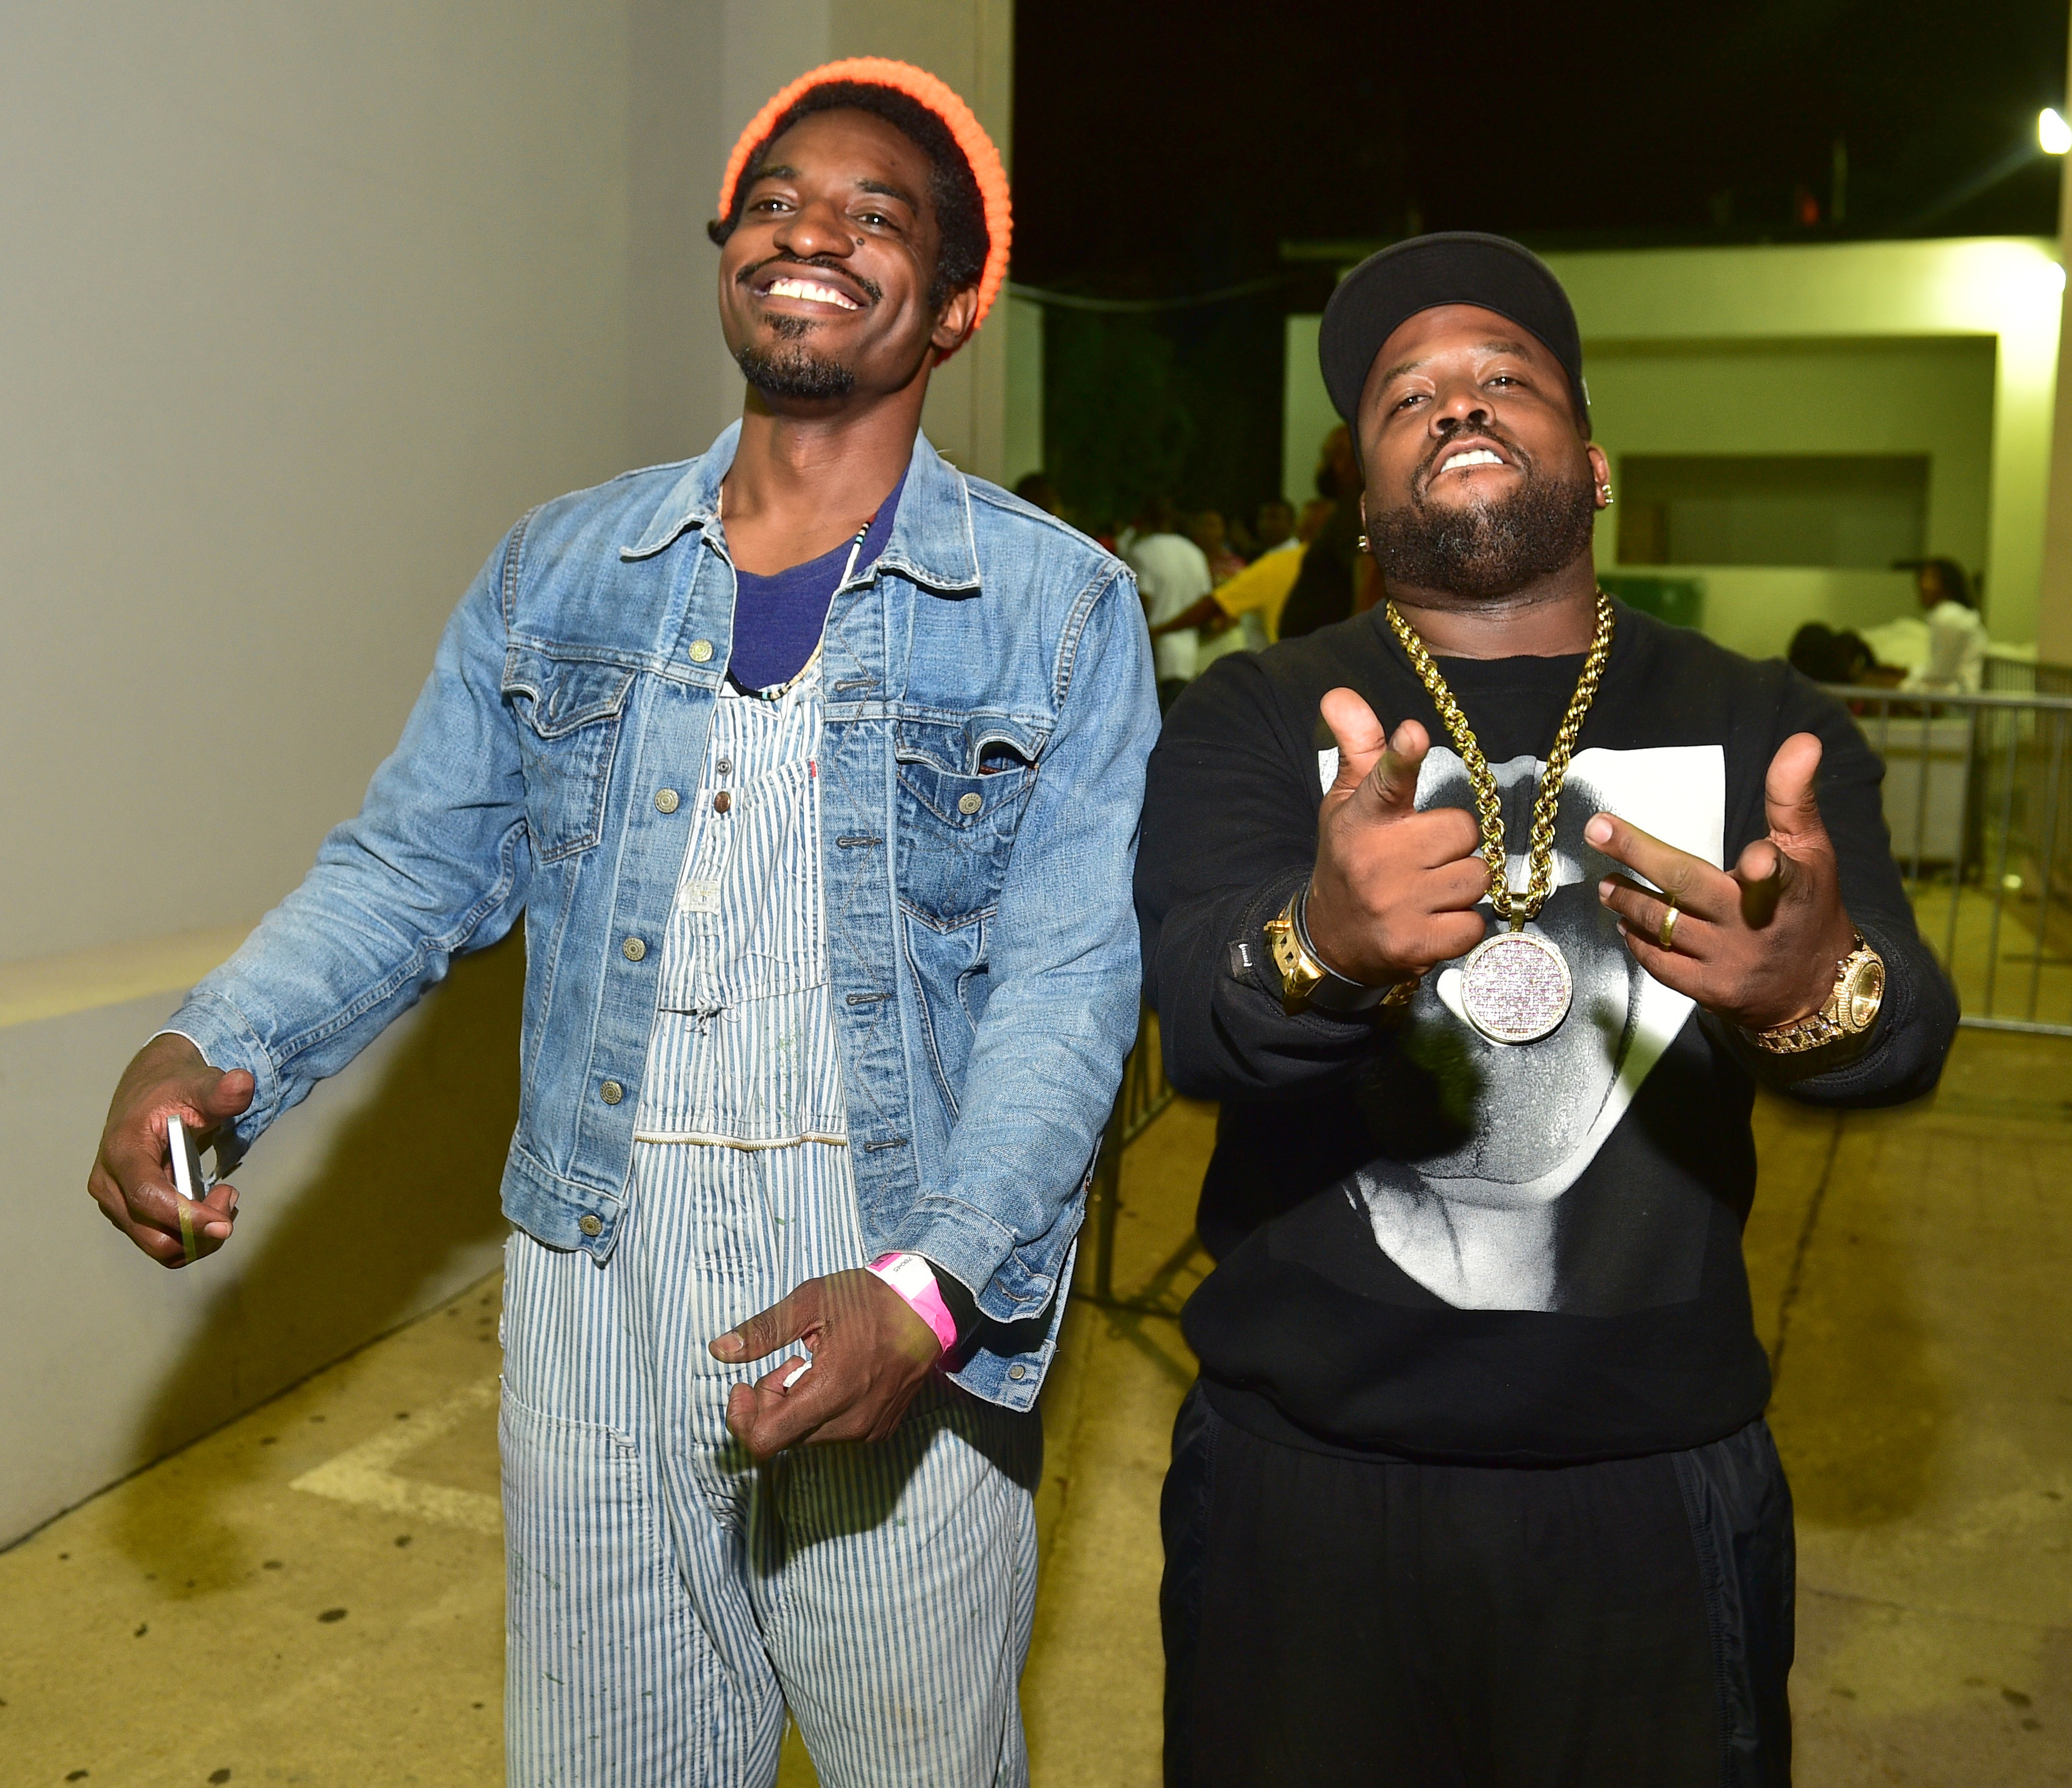 ATLANTA, GA - JUNE 20: Andre 3000 and Big Boi of the Group Outkast attend at Compound on June 20, 2015 in Atlanta, Georgia. (Photo by Prince Williams/WireImage)